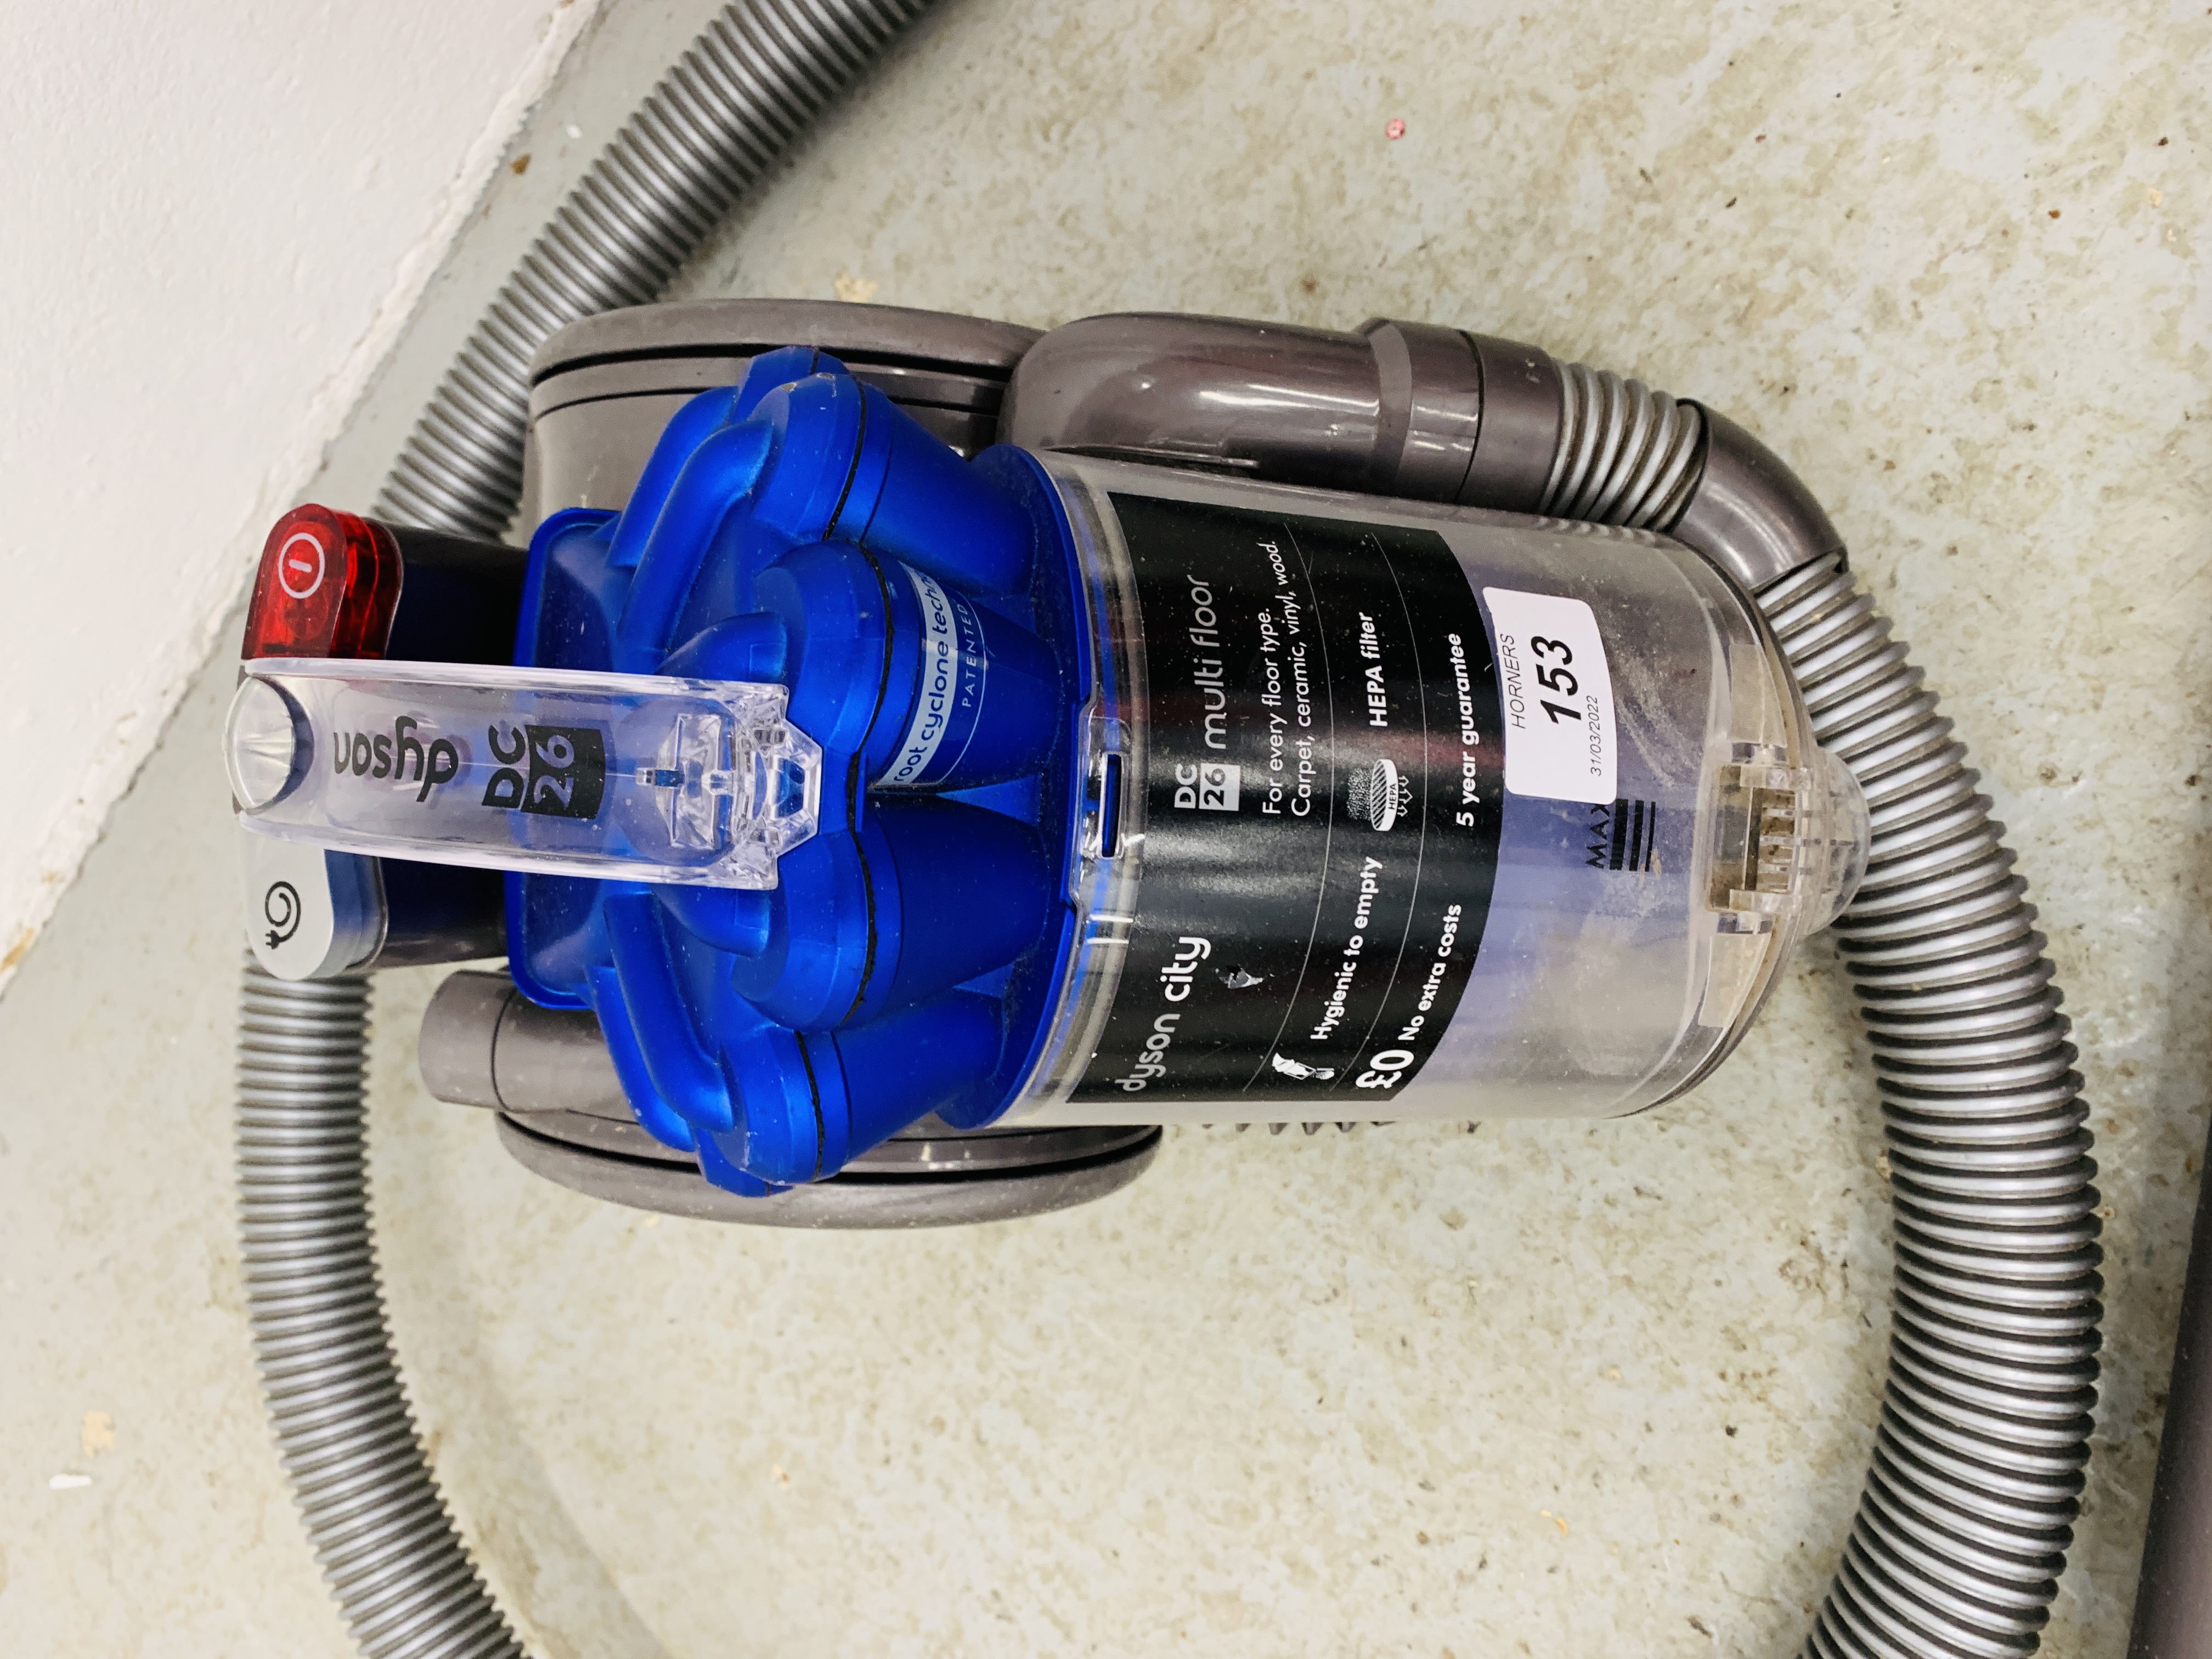 A DYSON DC26 COMPACT VACUUM CLEANER - SOLD AS SEEN. - Image 7 of 7